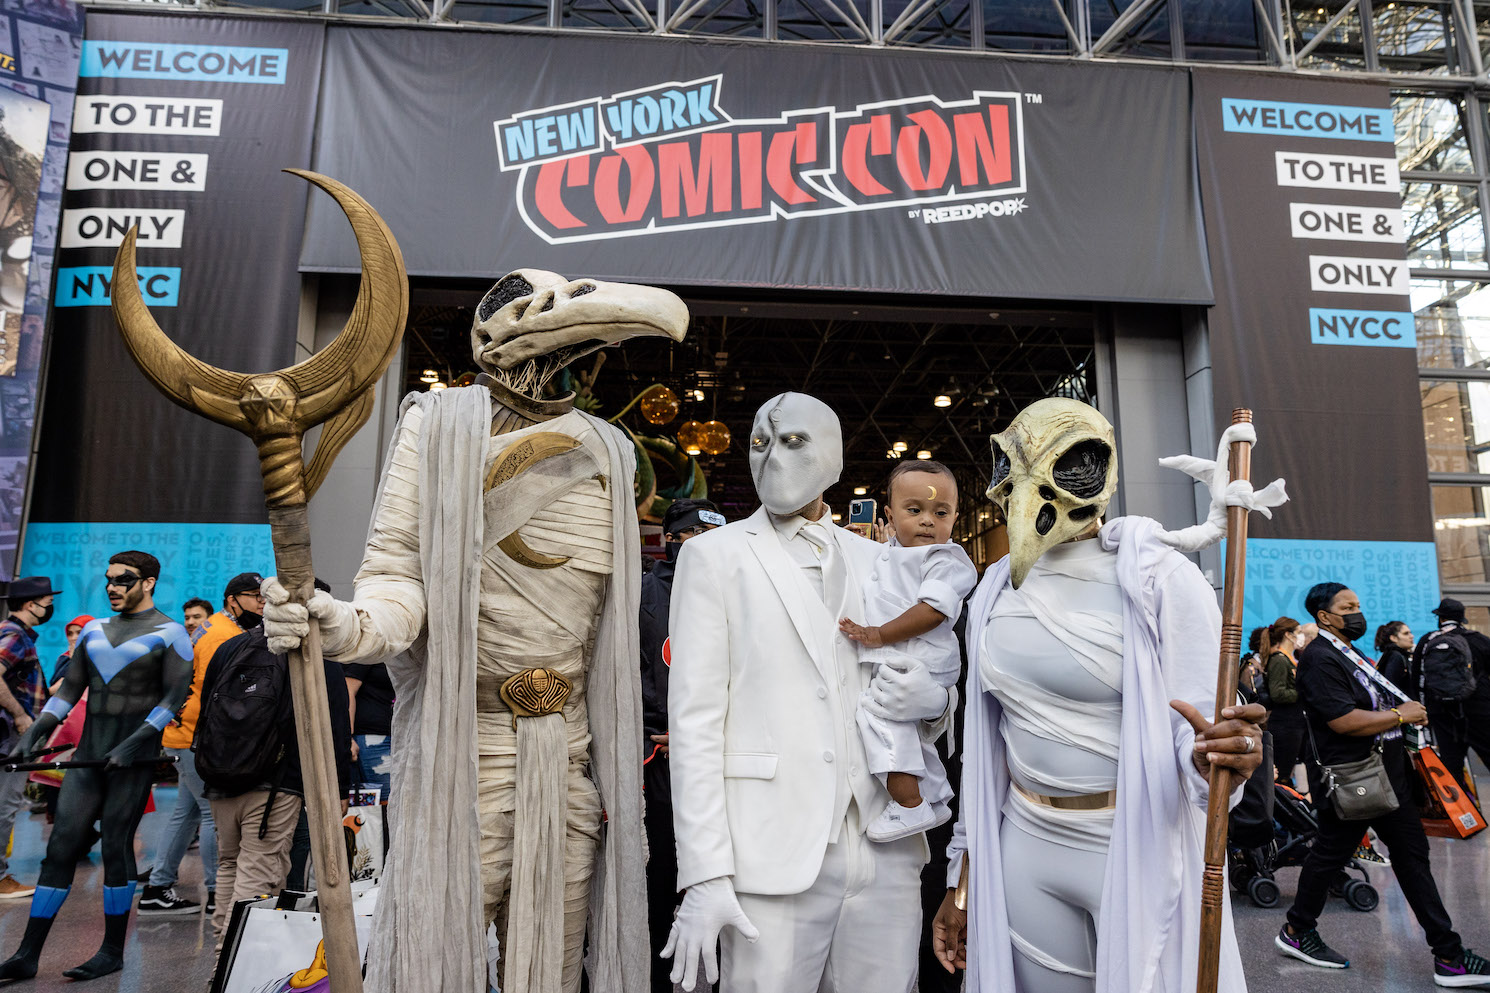 A family of four dressed in Moon Knight costumes. On the left, a person holding a staff with a crescent moon on the top of it wears mummy wrappings and a bird skull on the head. In the center, a person in a white suit and mask with a crescent moon holds a baby in a matching suit. On the right, a cosplayer in a white bodysuit, wrapped in mummy wrappings holds a brown staff.